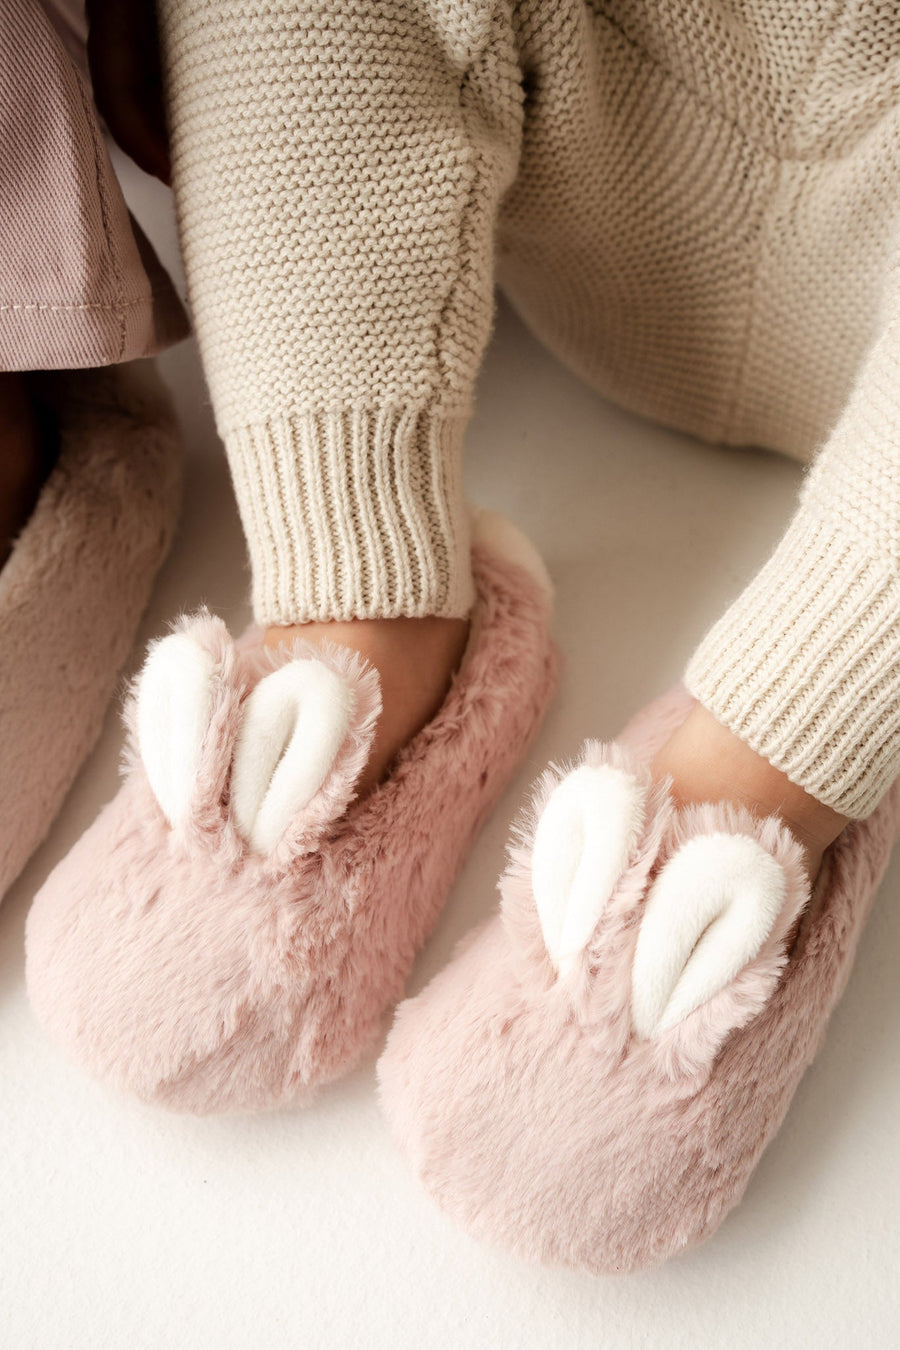 Bunny Slipper - Rose Childrens Footwear from Jamie Kay USA